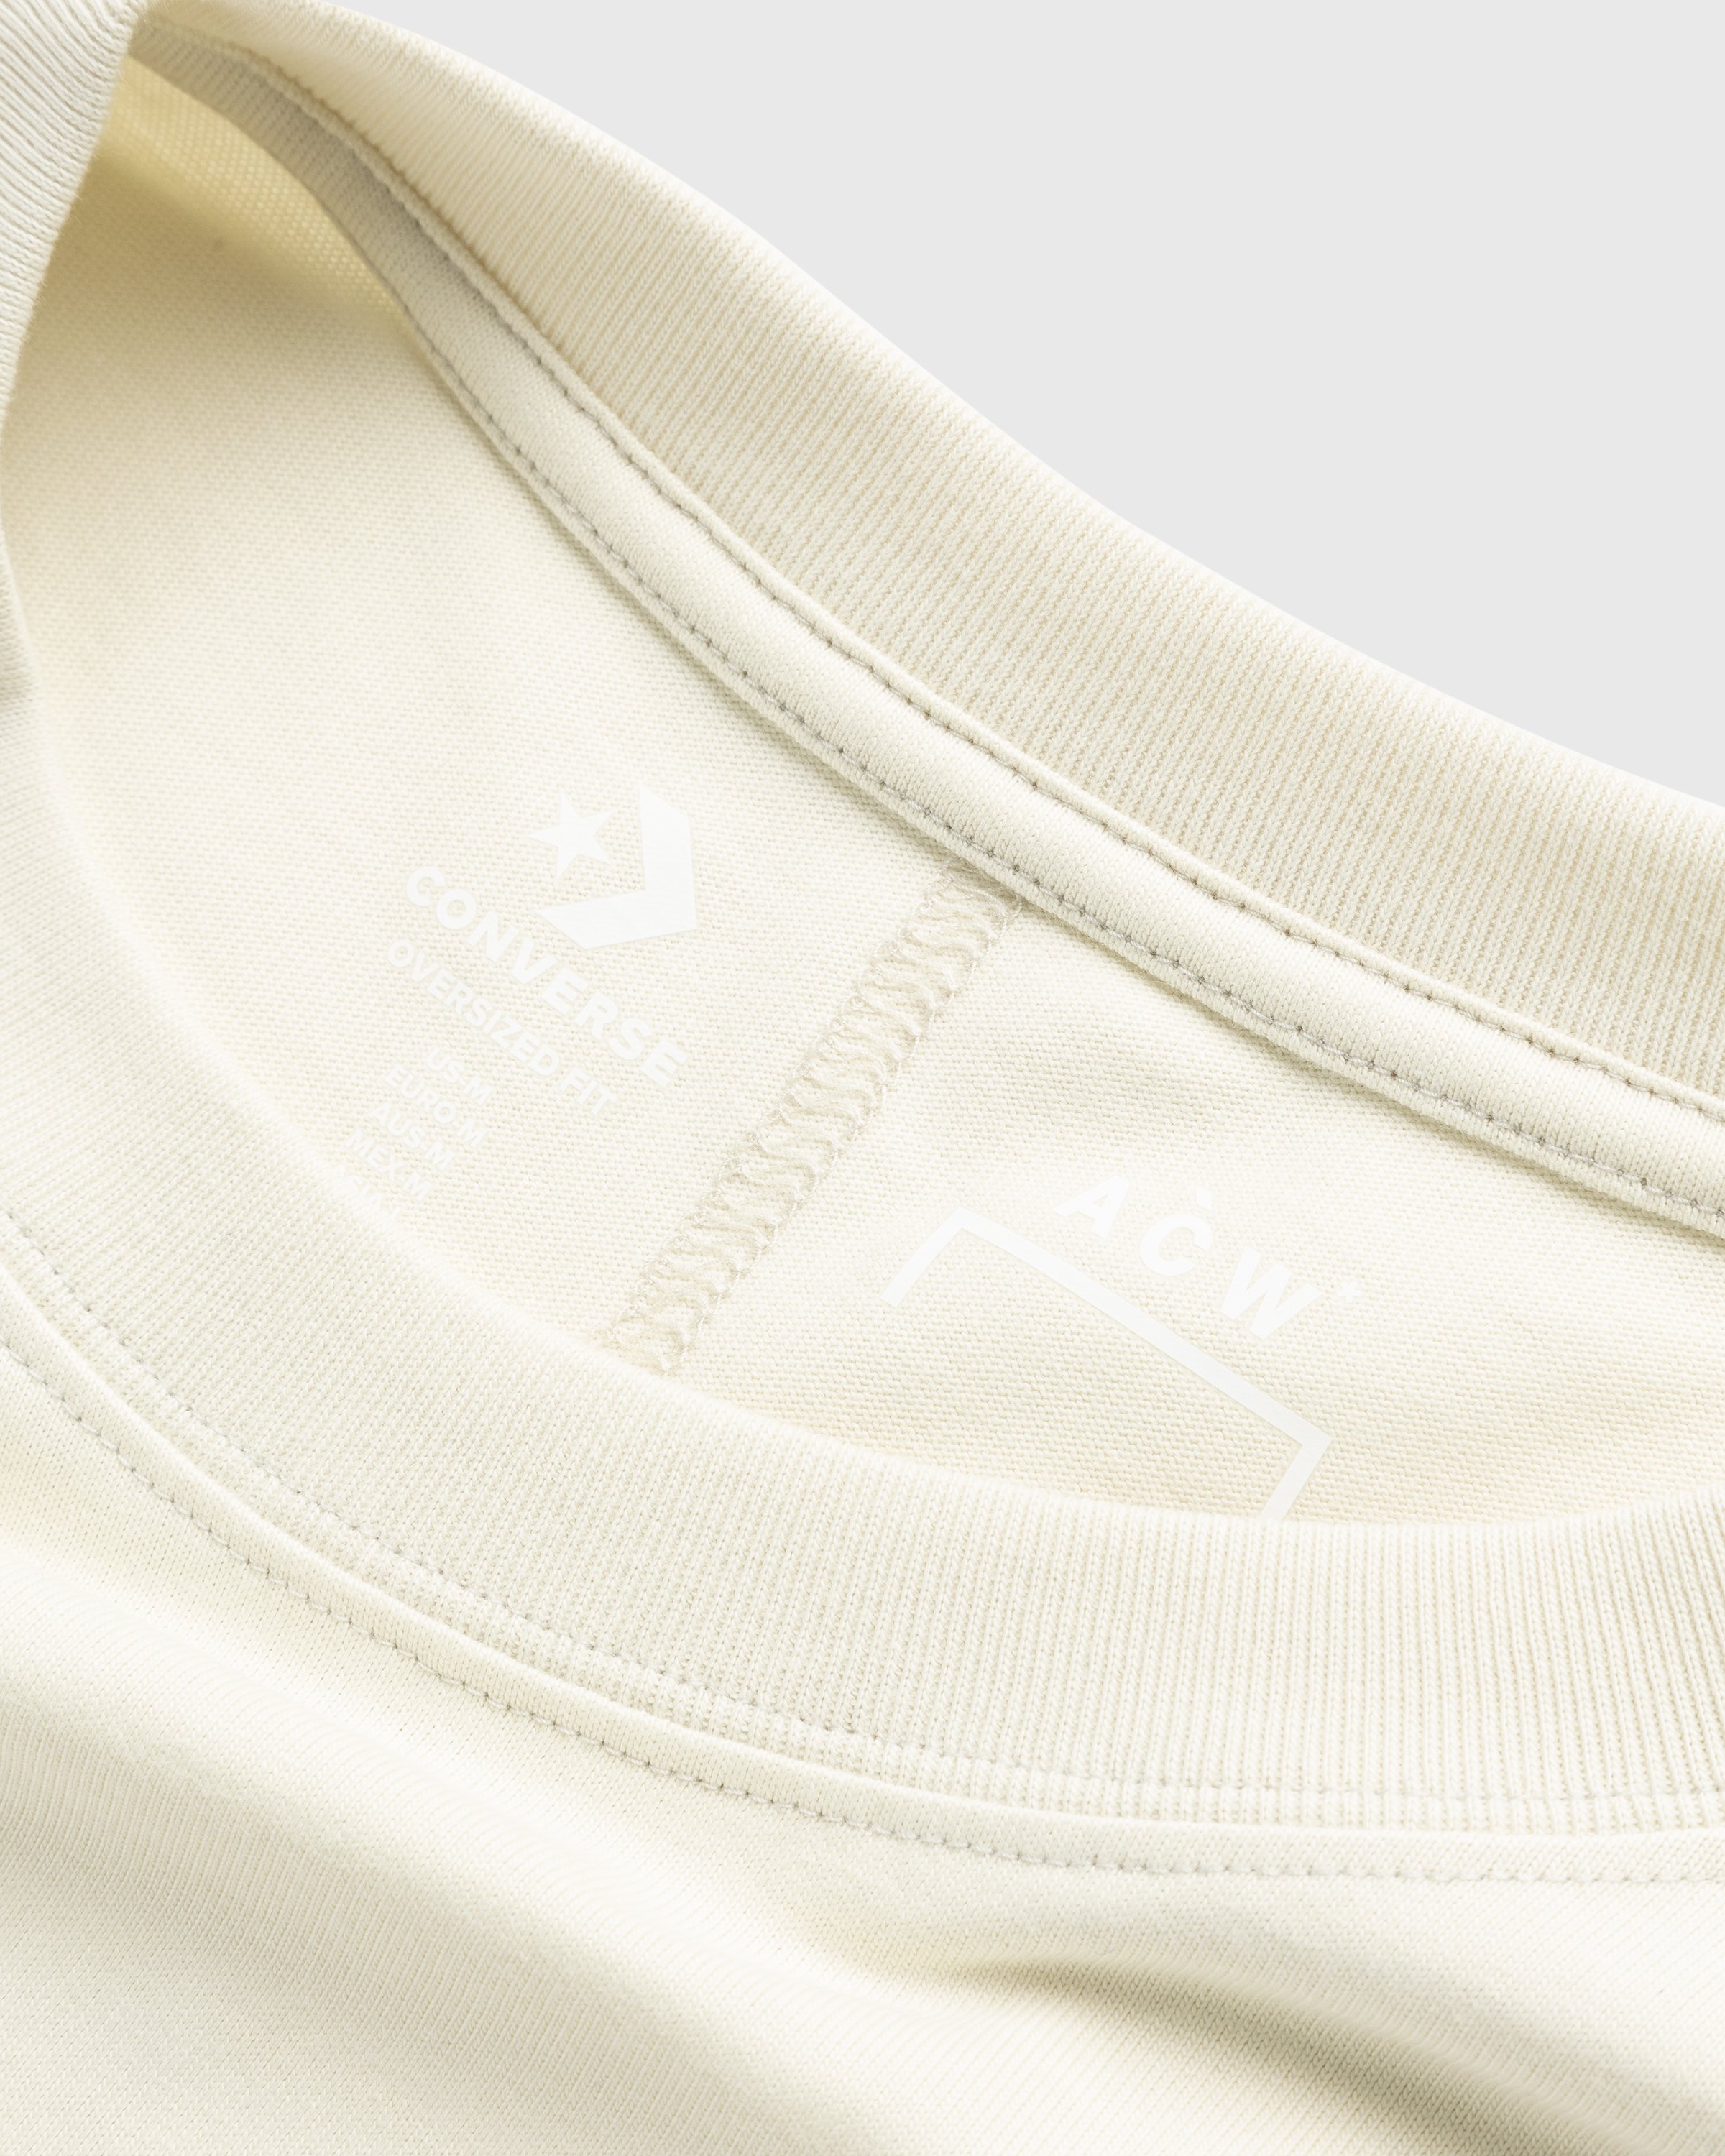 Converse x A-Cold-Wall* - Reflective Tee Bone White - Clothing - White - Image 3